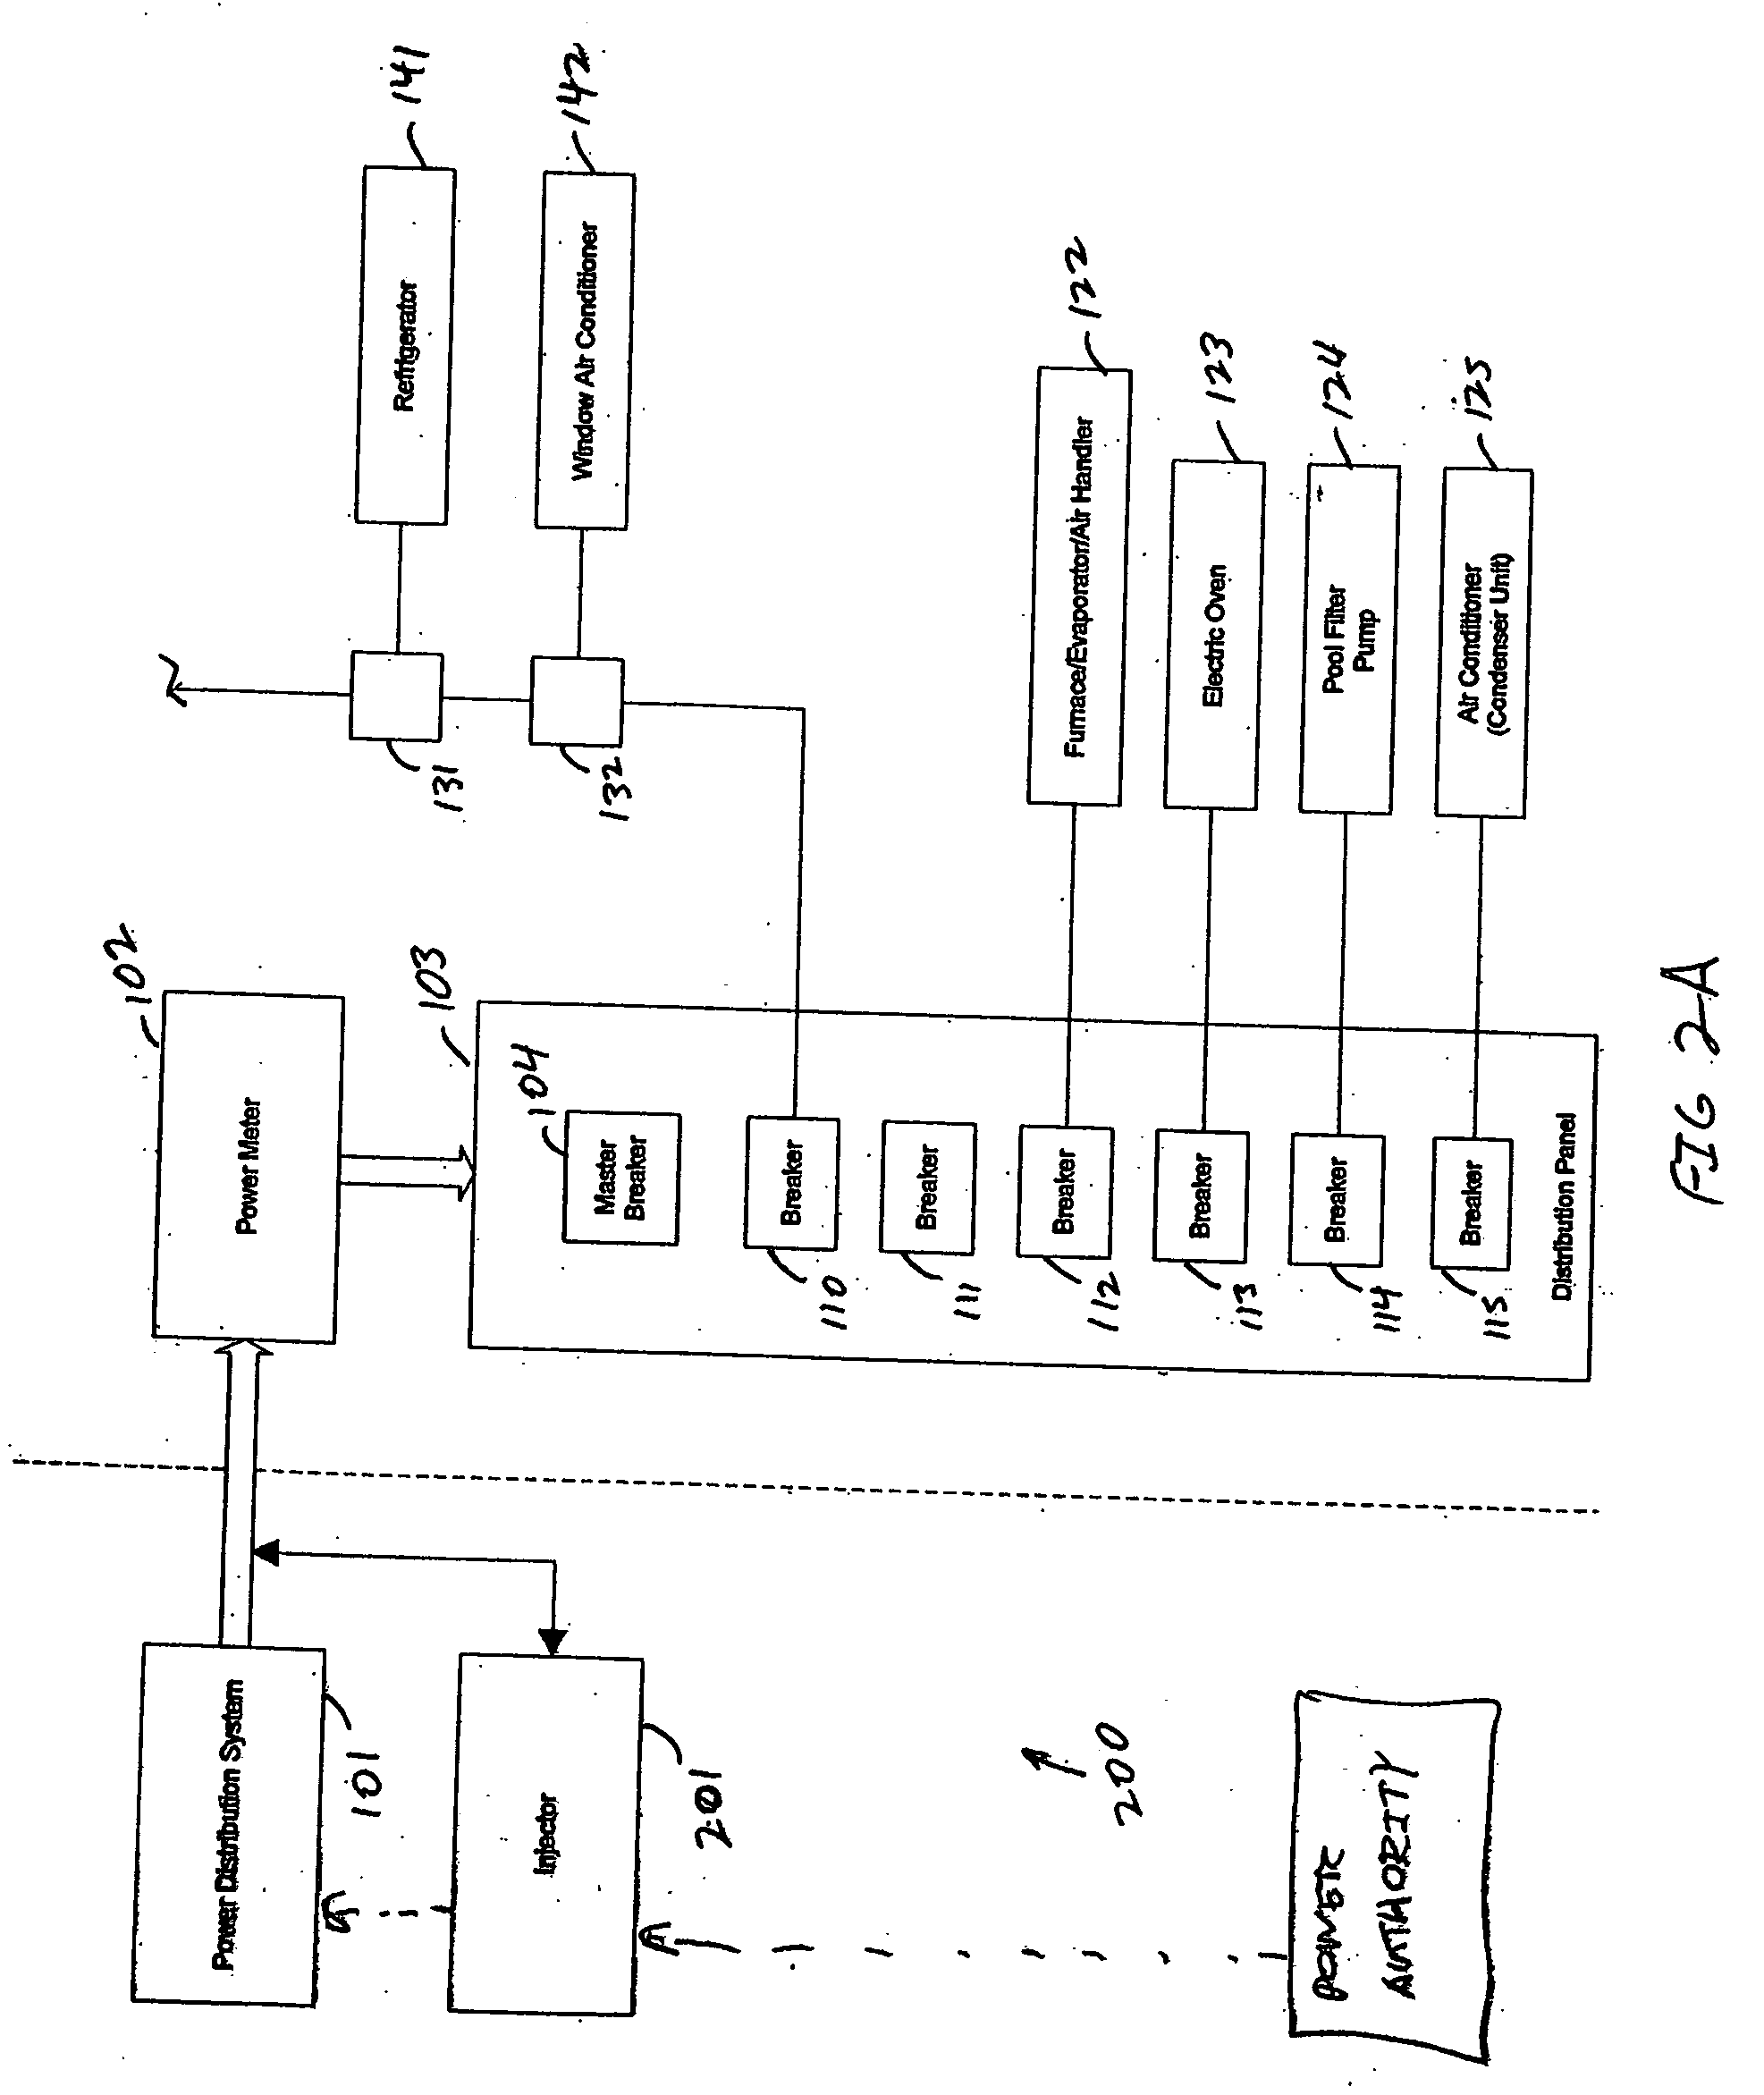 Method and apparatus for load management metering in an electric power system